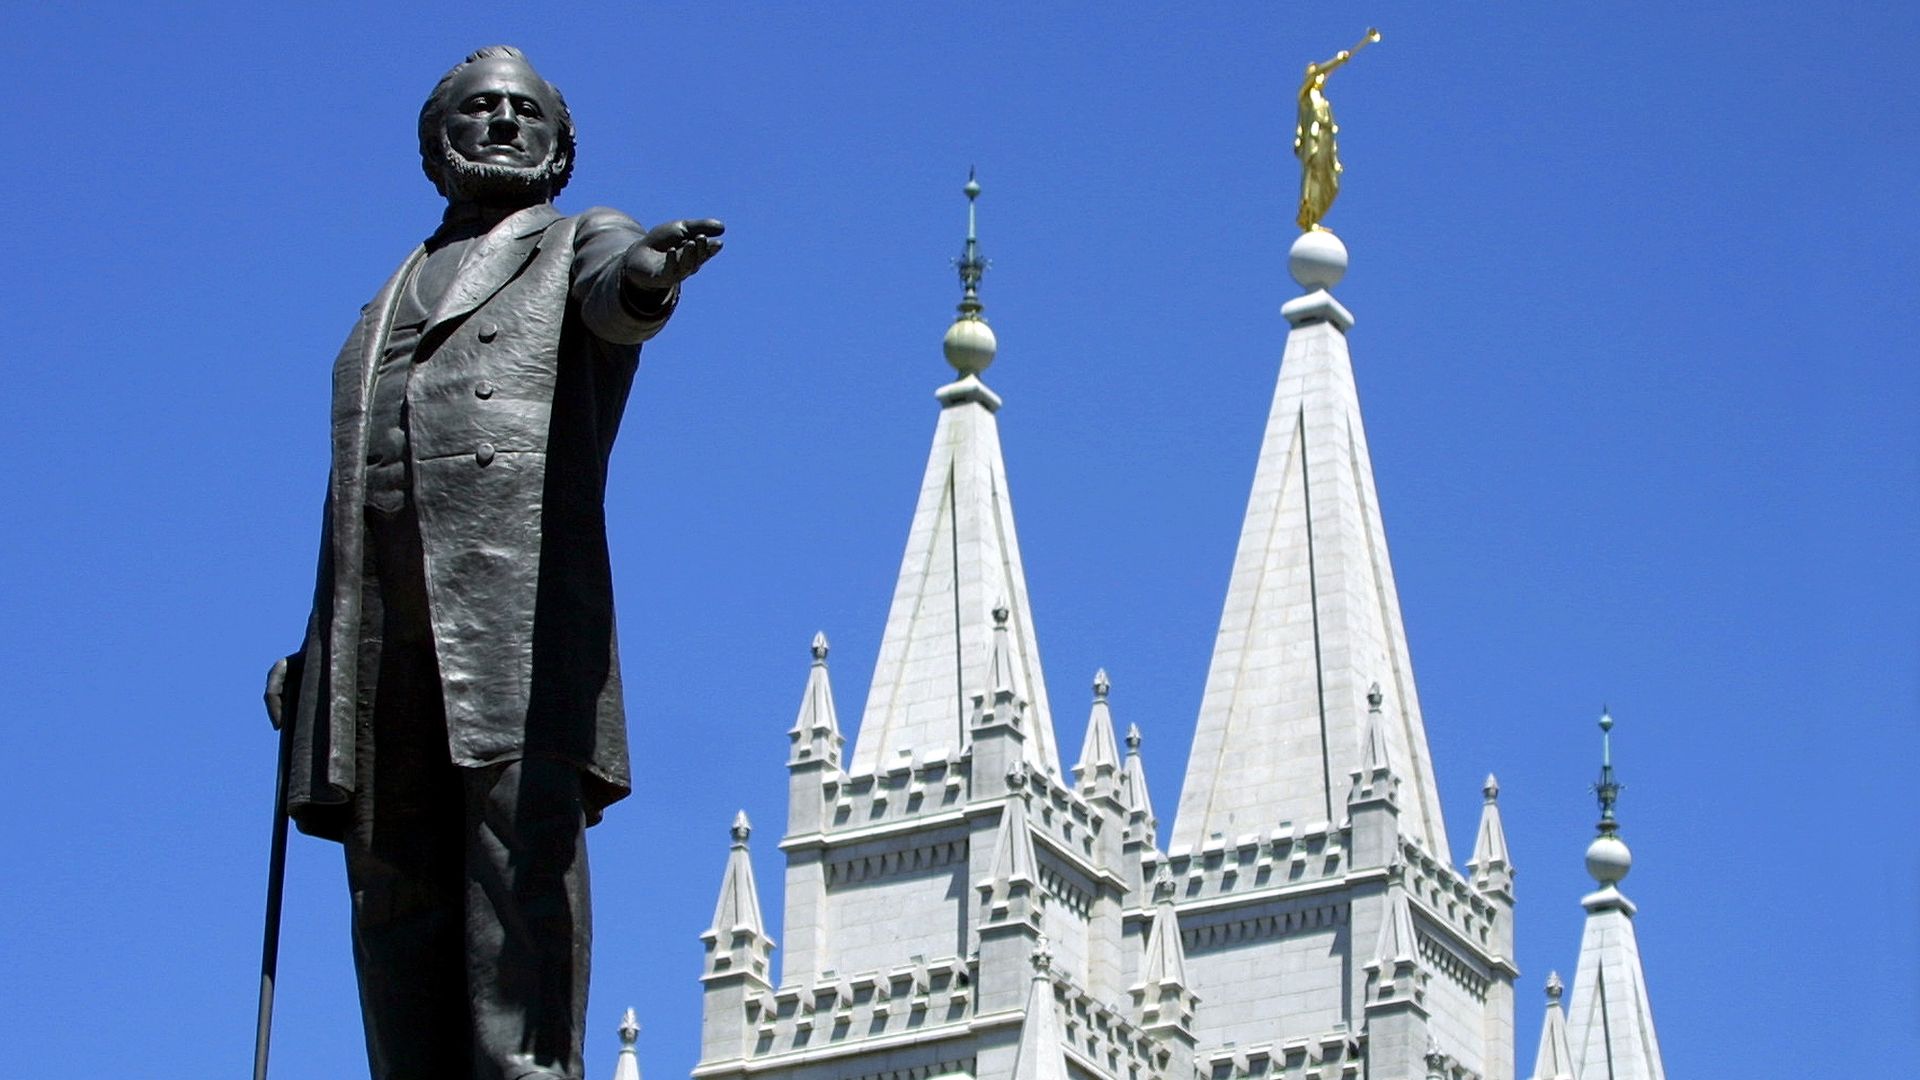  A statue of Brigham Young, second president of the Church of Jesus Christ of Latter Day Saints stands in the center of Salt Lake City with the Mormon Temple spires in the background 19 July 2001.